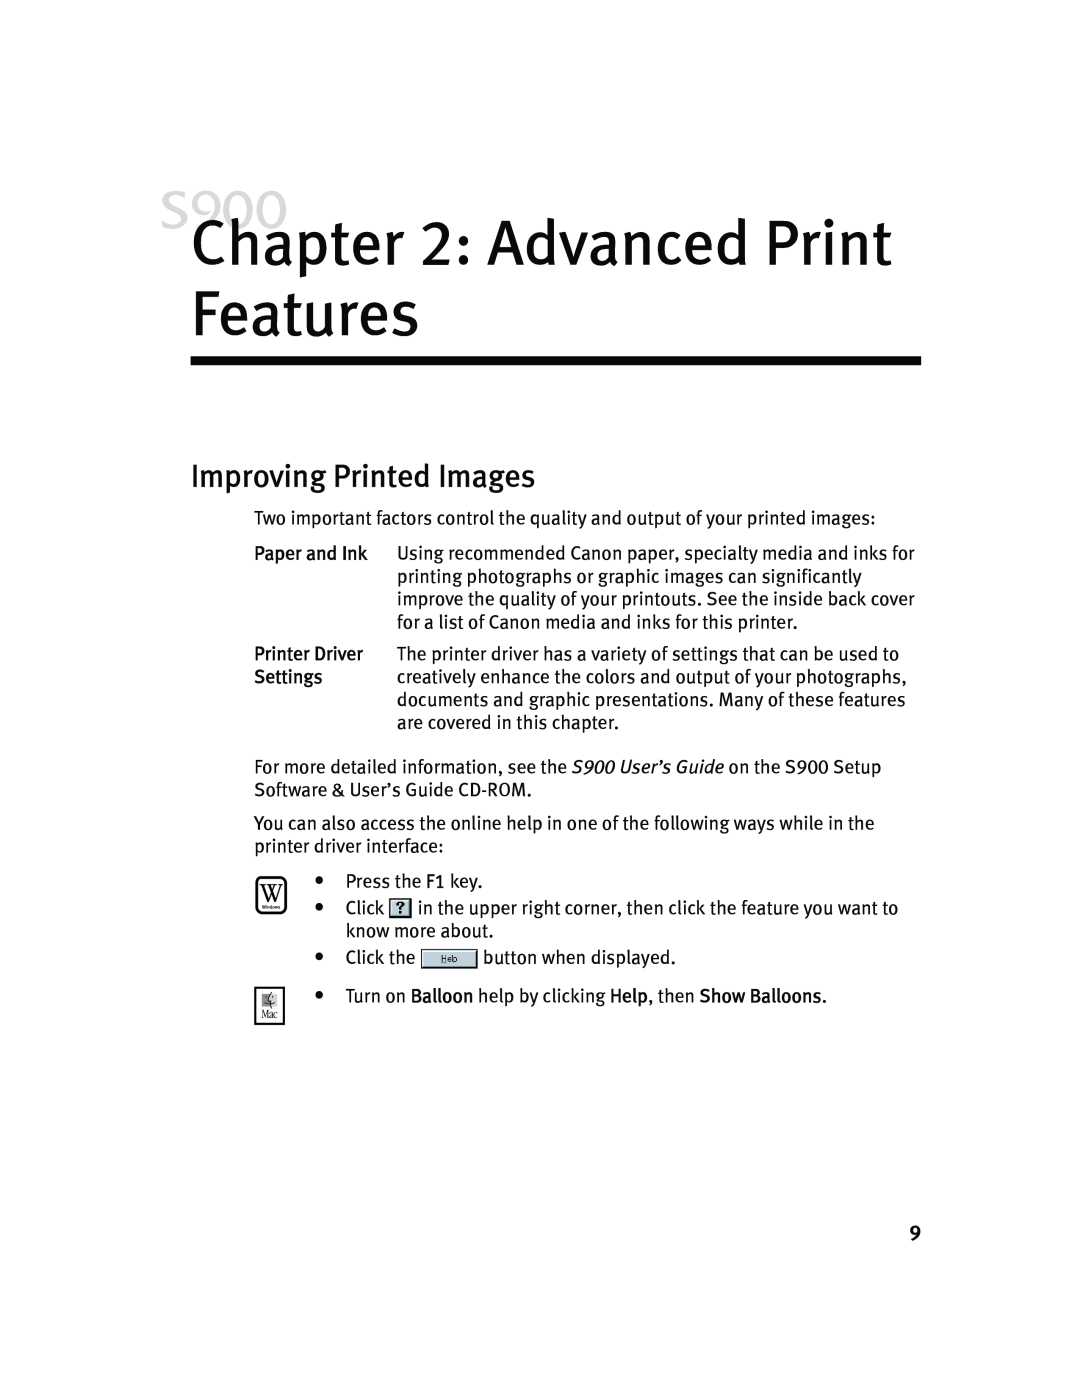 Canon S900 quick start Advanced Print Features, Improving Printed Images 